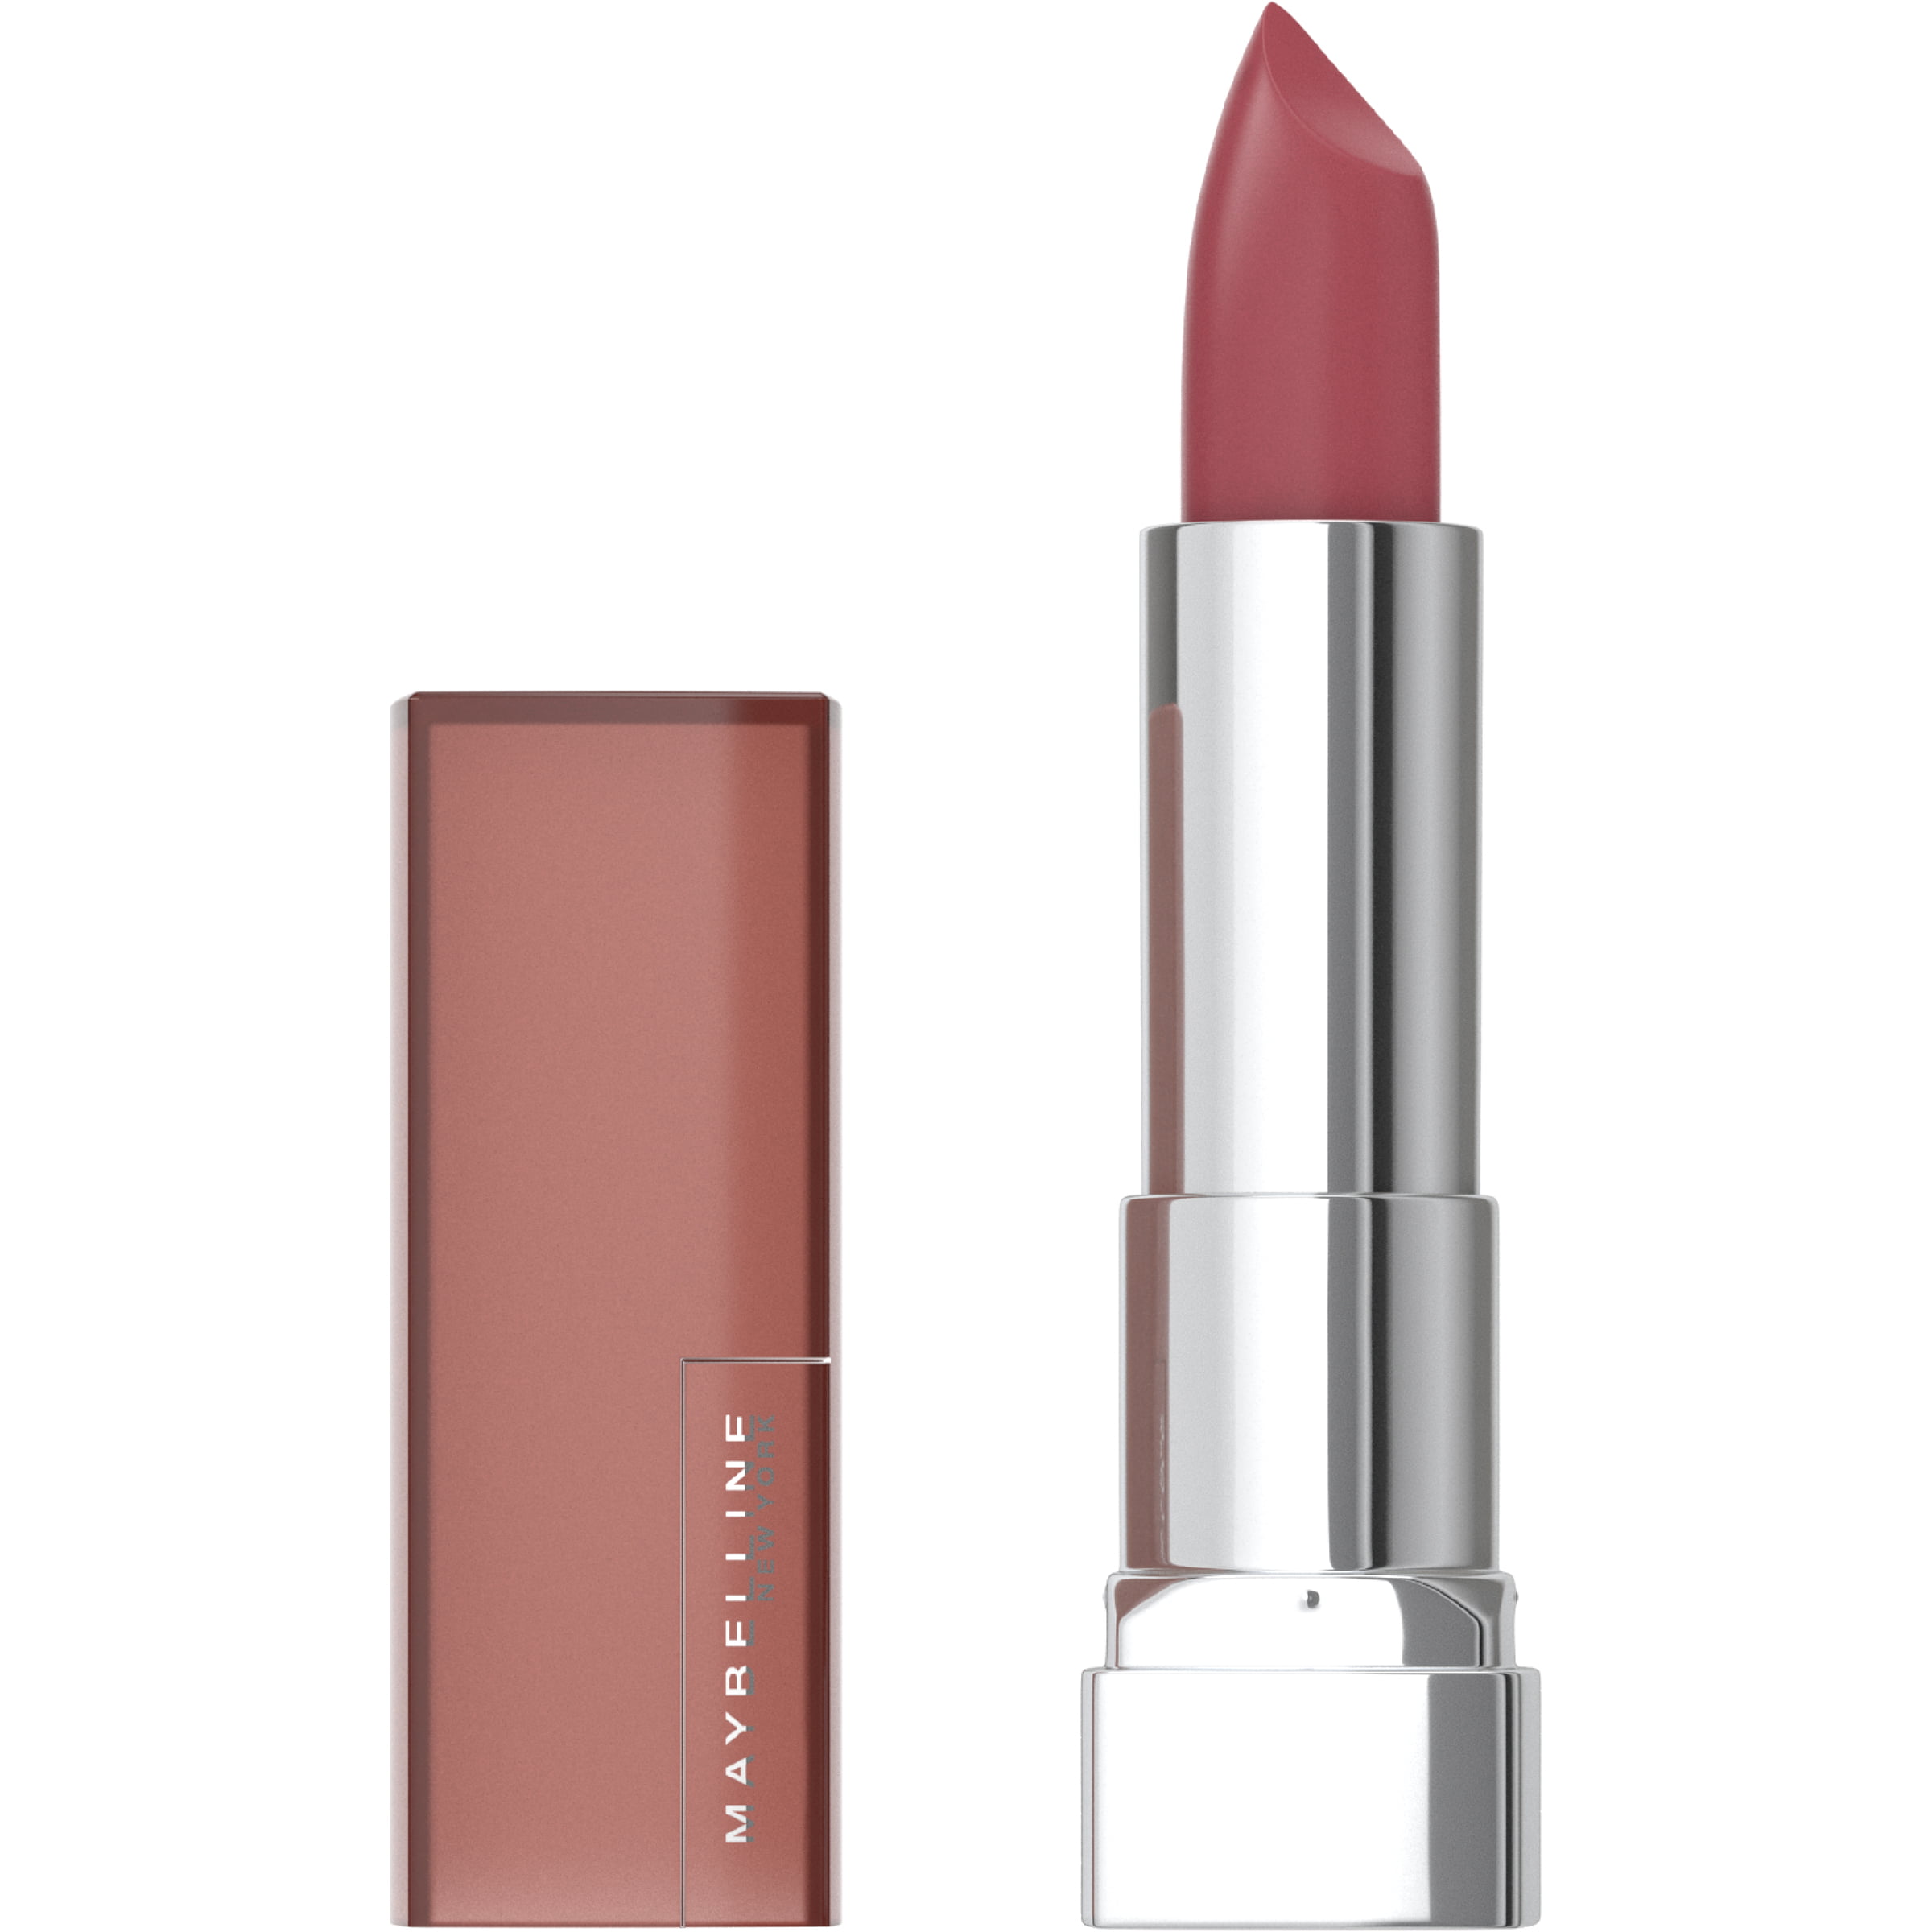 Maybelline Color Sensational Matte Finish Lipstick, Touch Of Spice - image 1 of 9